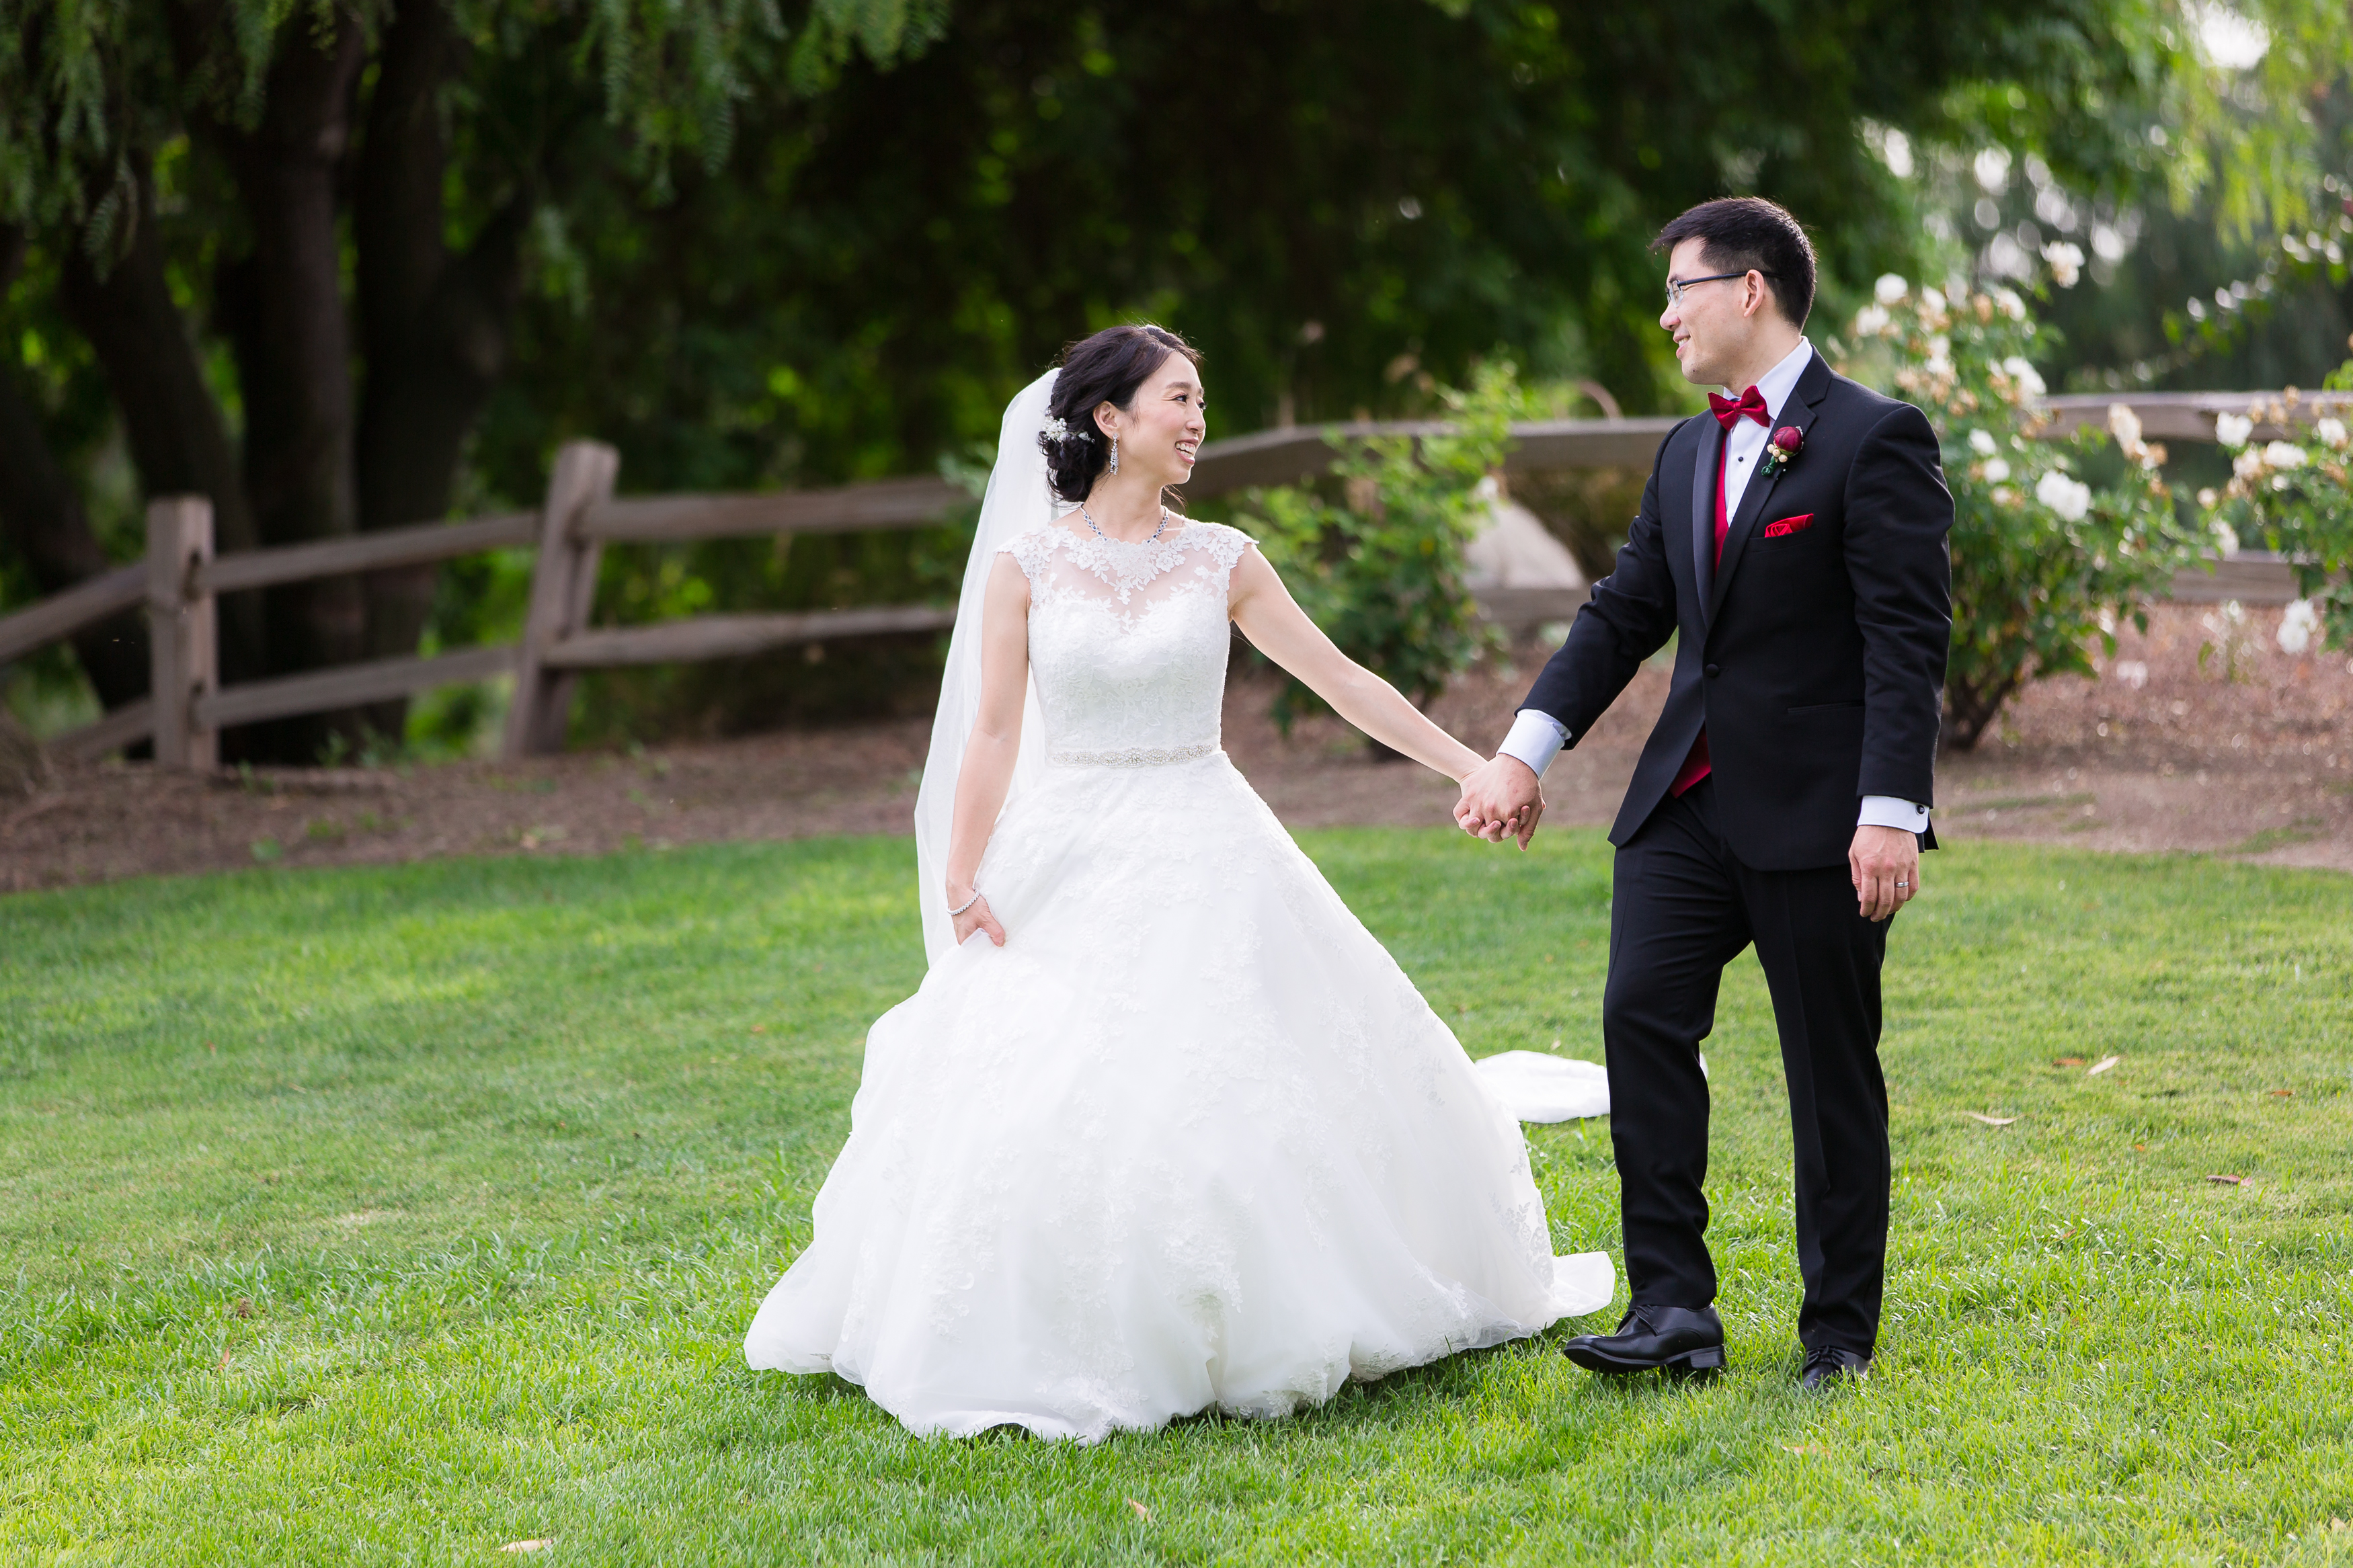 Bride holding groom's hand walking side by side and smiling at each other